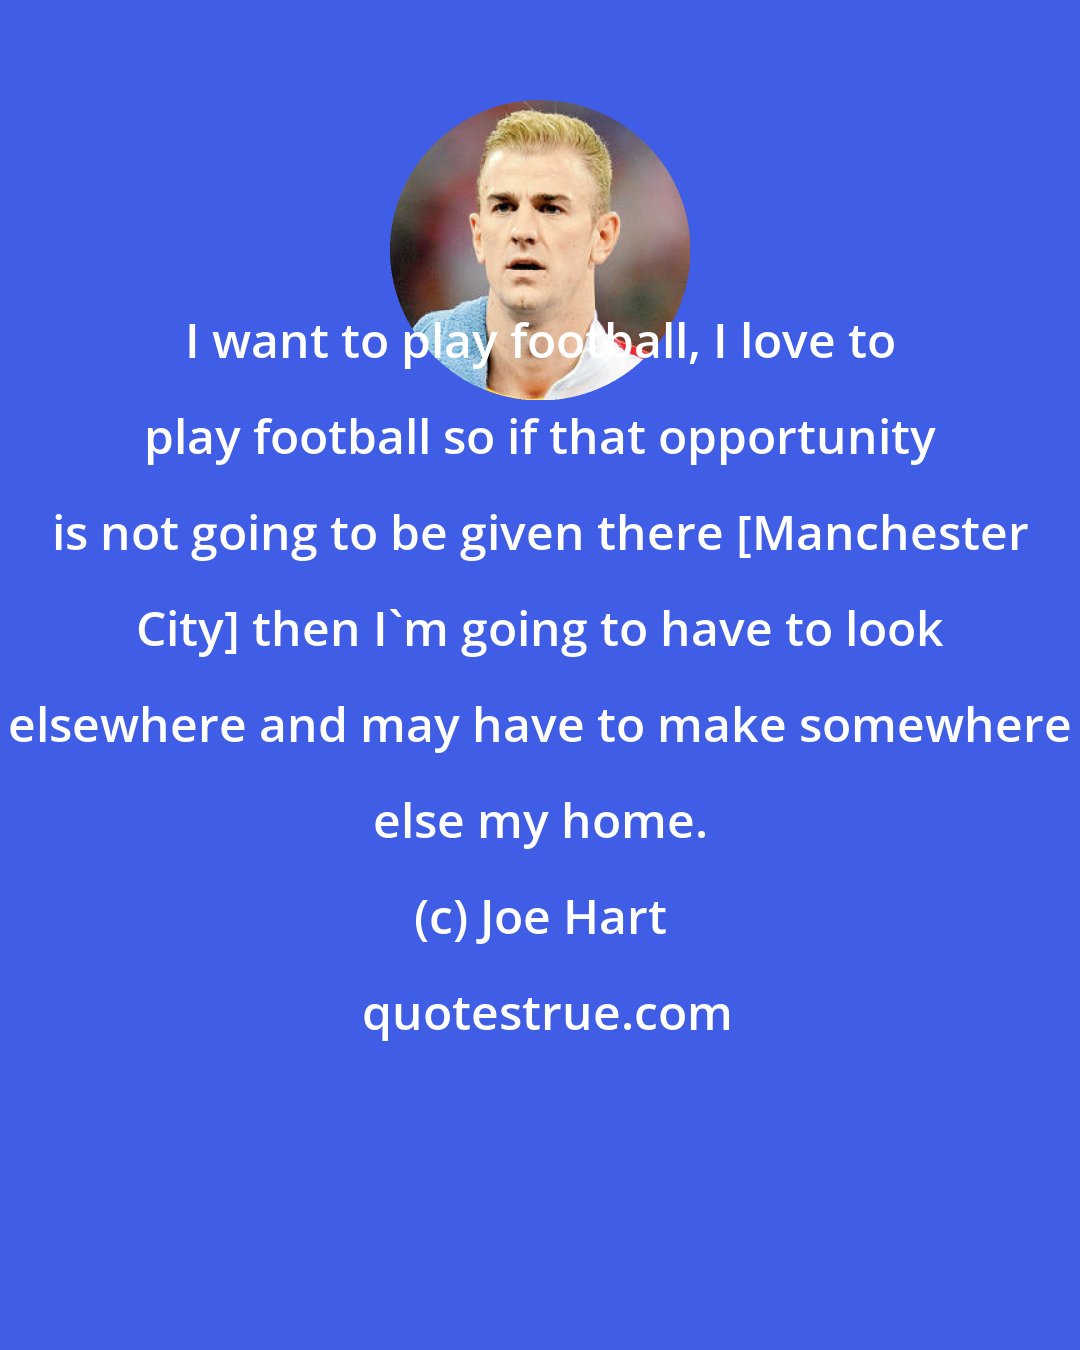 Joe Hart: I want to play football, I love to play football so if that opportunity is not going to be given there [Manchester City] then I'm going to have to look elsewhere and may have to make somewhere else my home.